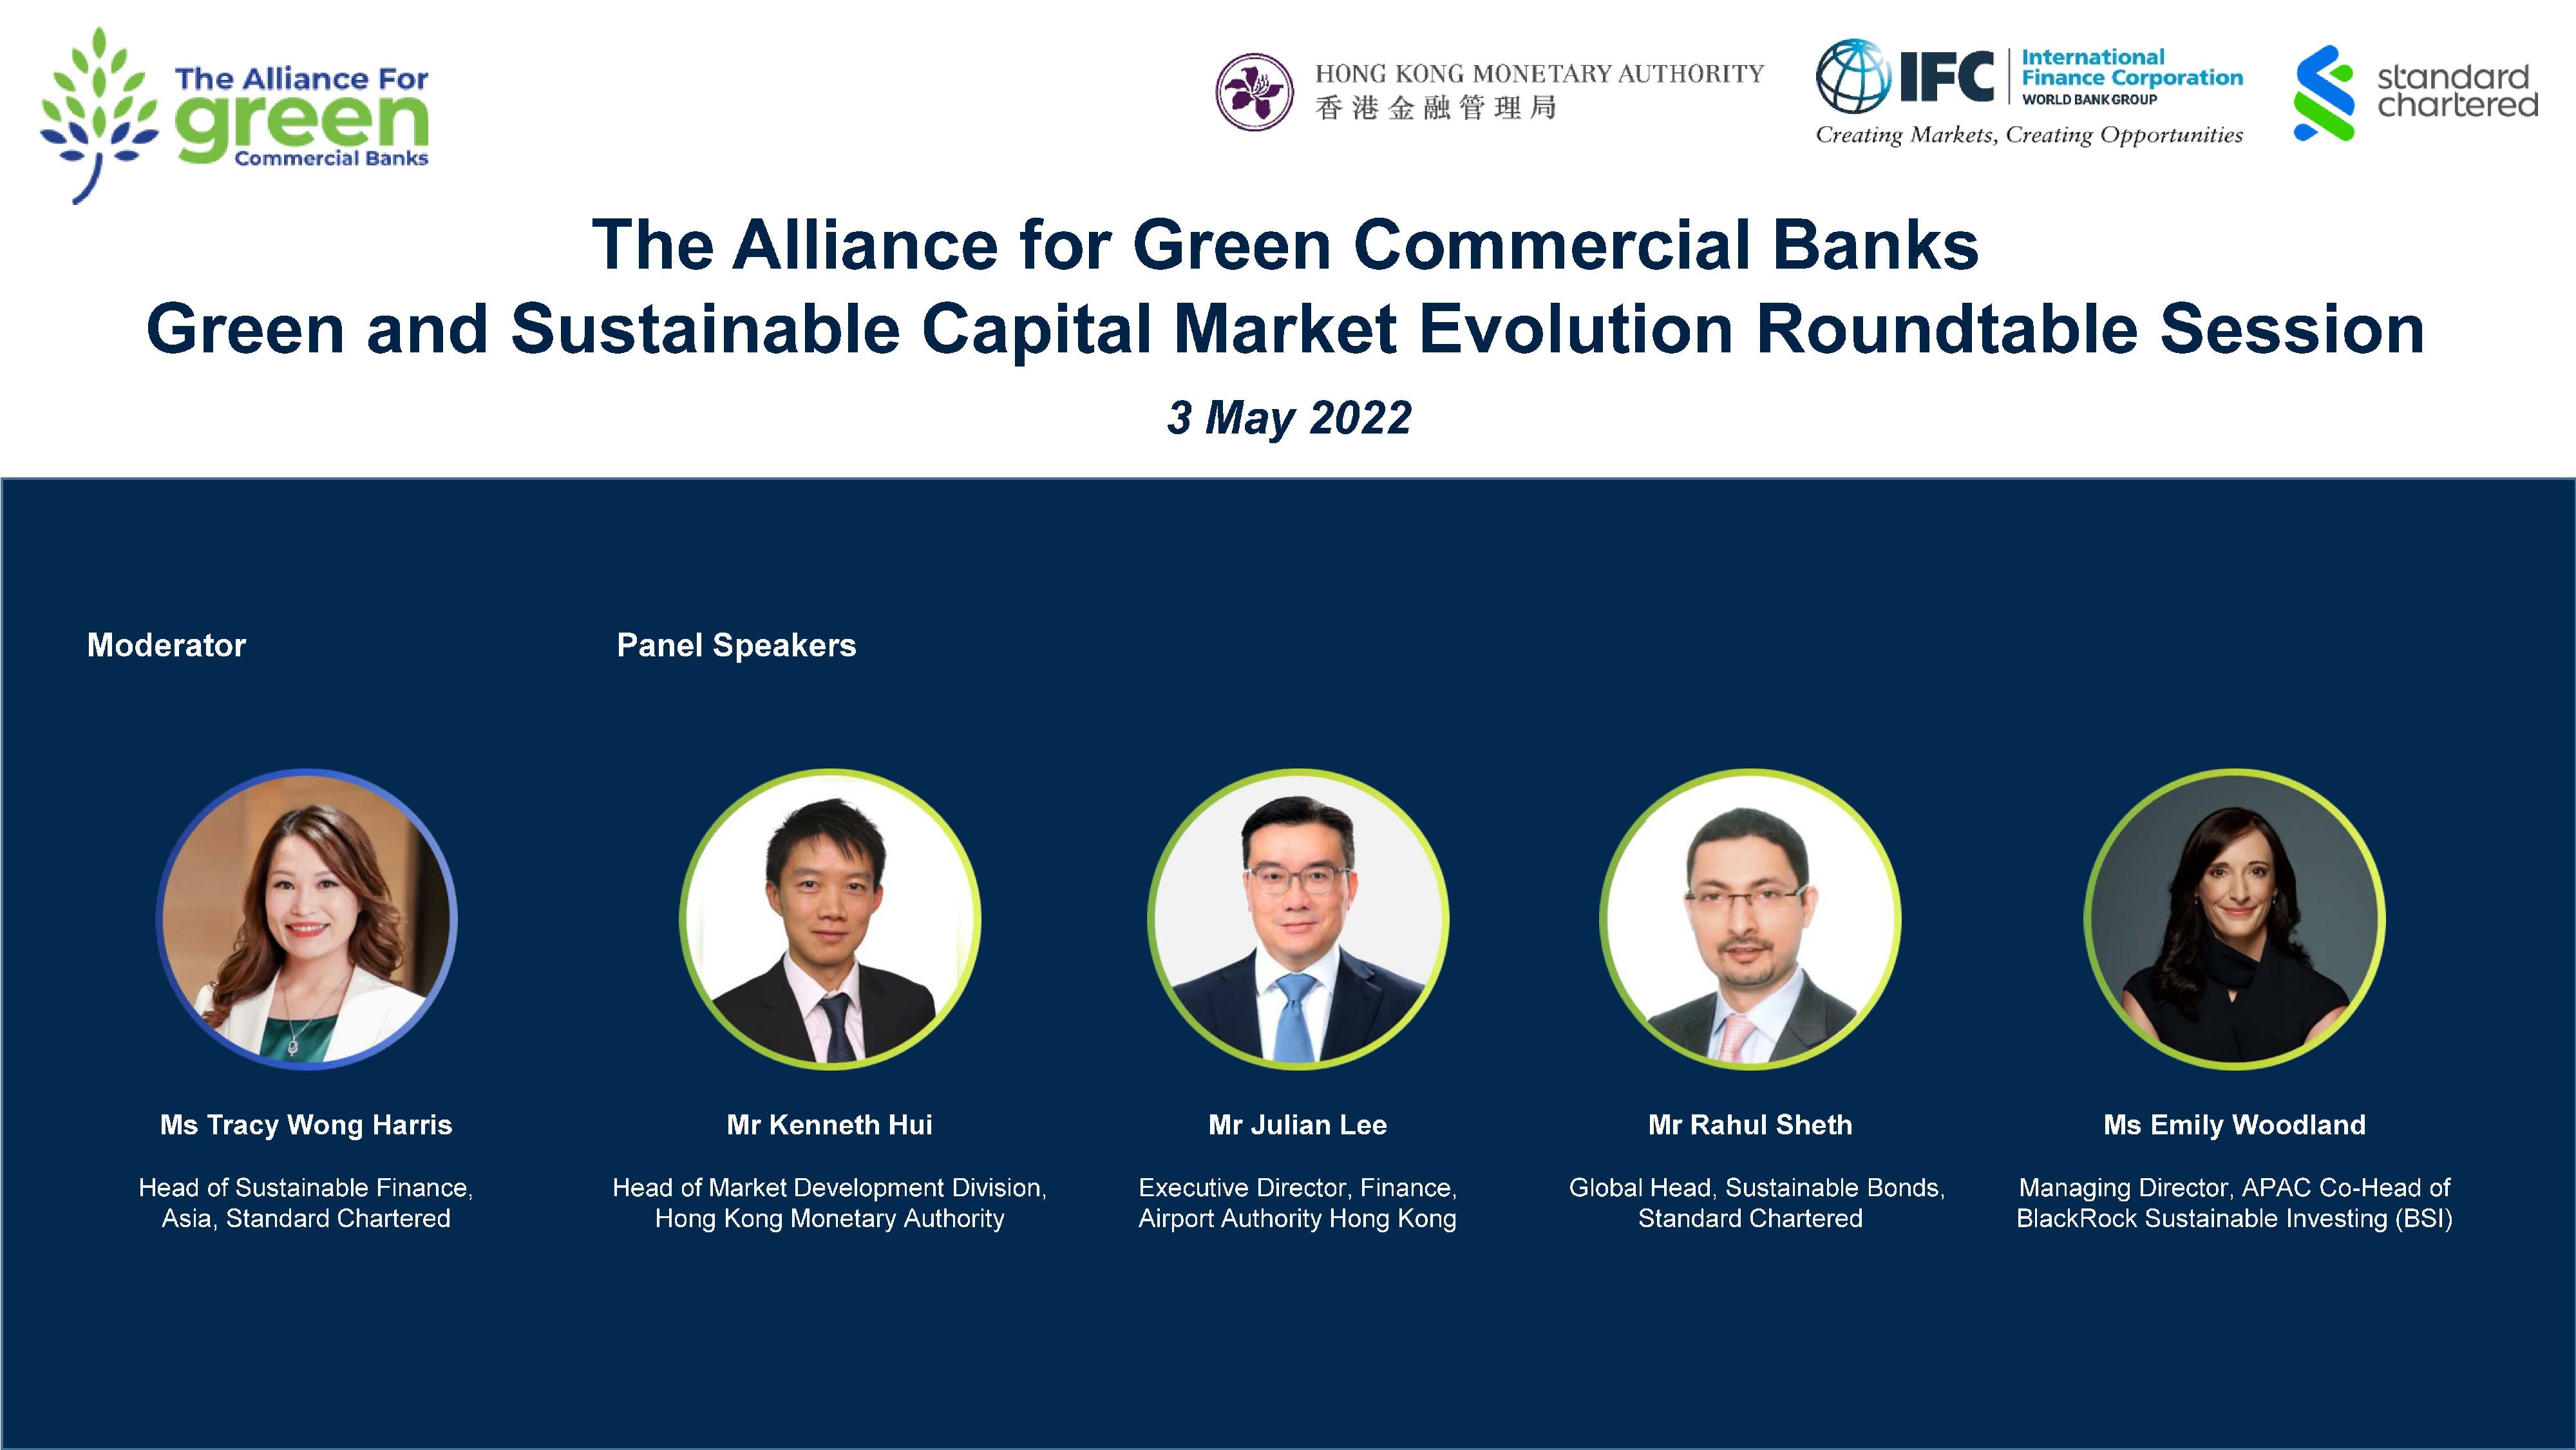 The Alliance for Green Commercial Banks co-hosted the "Green and Sustainable Capital Market Evolution Roundtable Session" with Standard Chartered virtually today (May 3). The panel discussion is moderated by Head of Sustainable Finance, Asia, Standard Chartered Ms Tracy Wong Harris (first left), and is joined by (from second left) the Head of Market Development Division, Hong Kong Monetary Authority, Mr Kenneth Hui; Executive Director, Finance, Airport Authority Hong Kong Mr Julian Lee; Global Head, Sustainable Bonds, Standard Chartered Mr Rahul Sheth; and Managing Director, APAC Co-Head of BlackRock Sustainable Investing Ms Emily Woodland. 